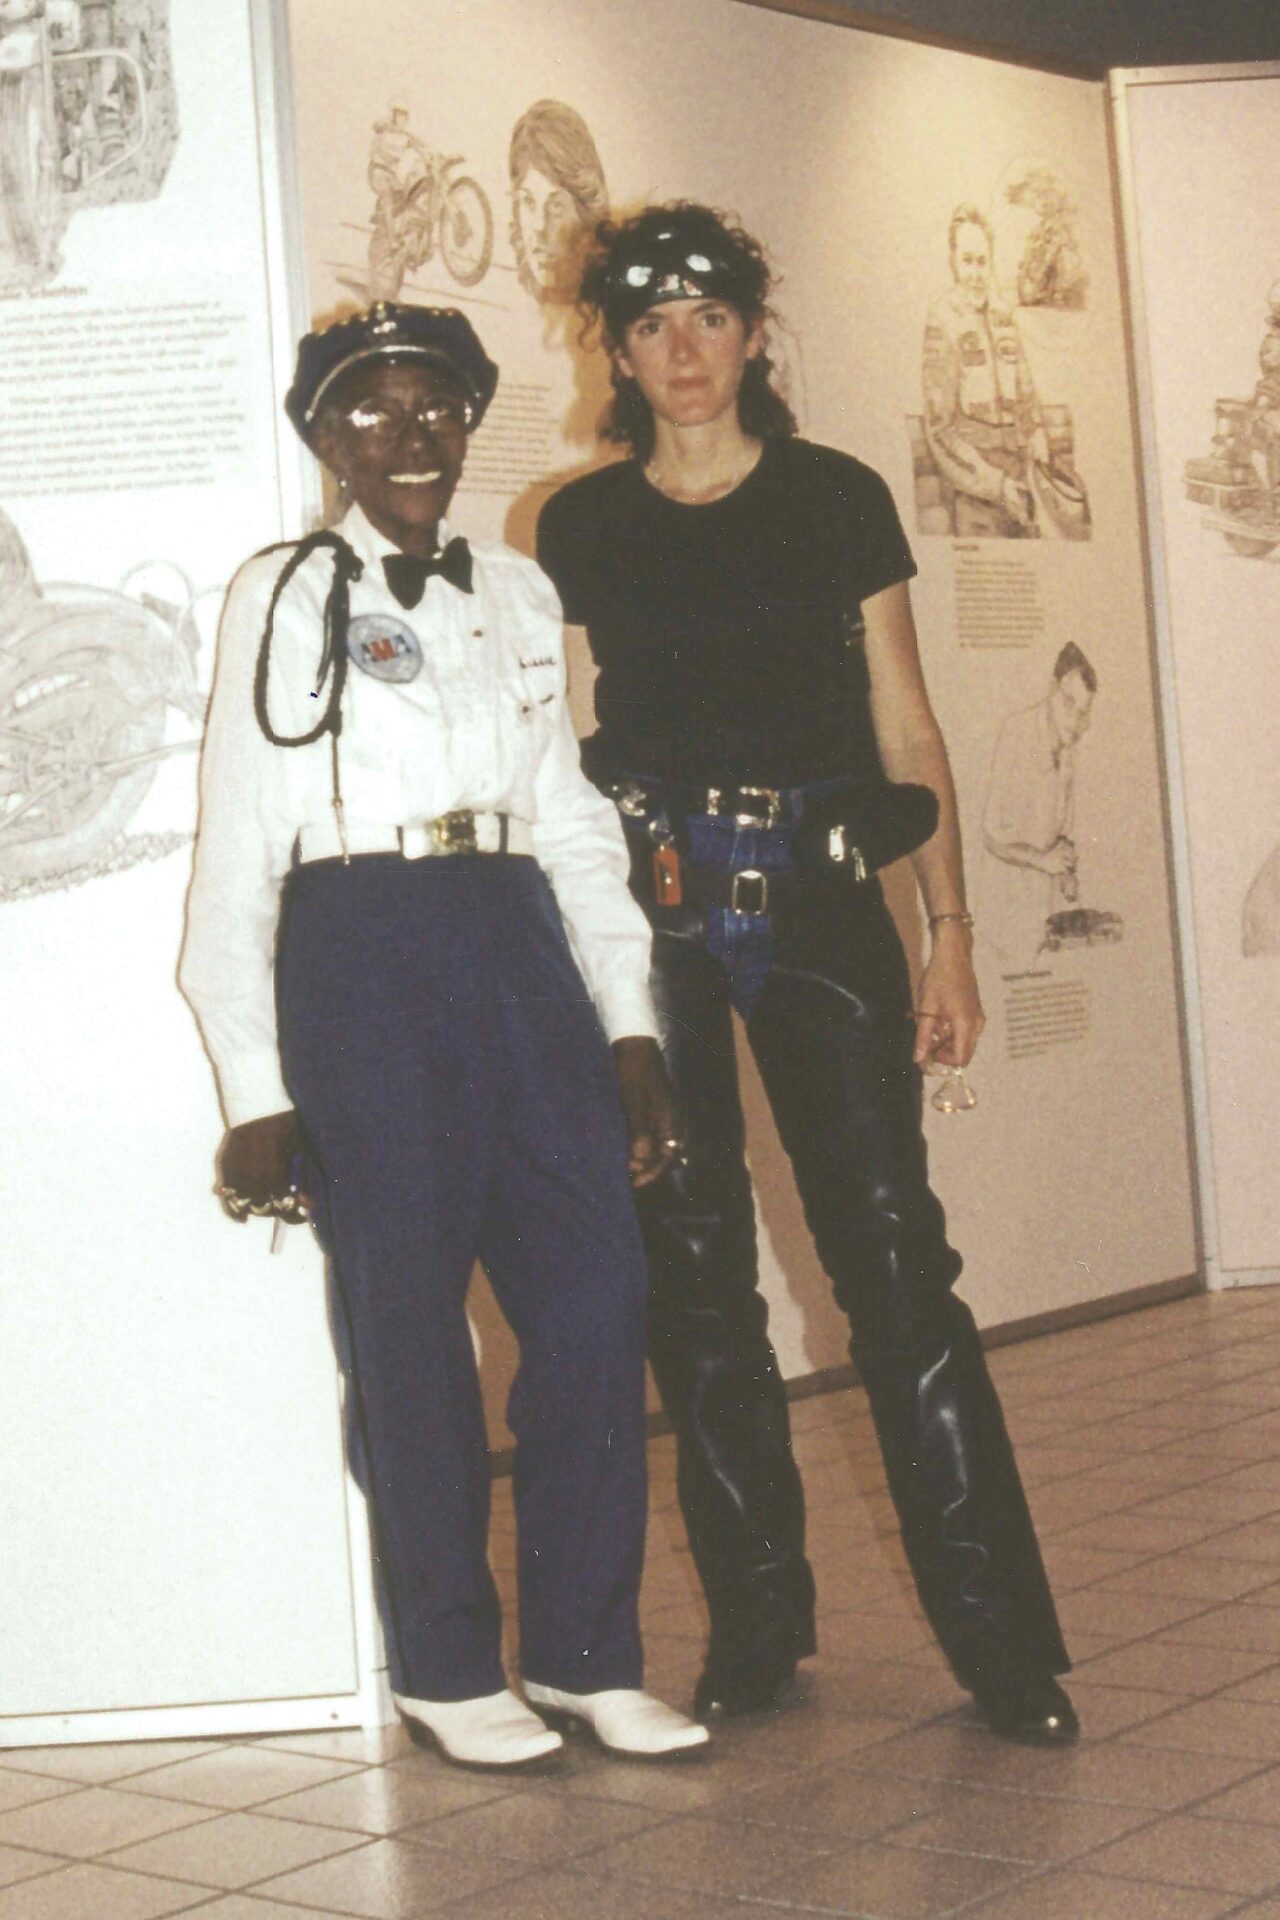 Bessie Stringfield (left) with Ann Ferrar, her biographer and friend, on the day they met in the summer of 1990. The author's coming book is <i>African American Queen of the Road: Bessie Stringfield—A Woman's Journey Through Faith, Resilience and the Road </i>. Expanding on Ferrar's earlier published stories of Bessie, the book is Stringfield's definitive biography. Bessie kept this photo on top of her old box TV set in her Miami home. Ann still keeps her copy above her writing desk.